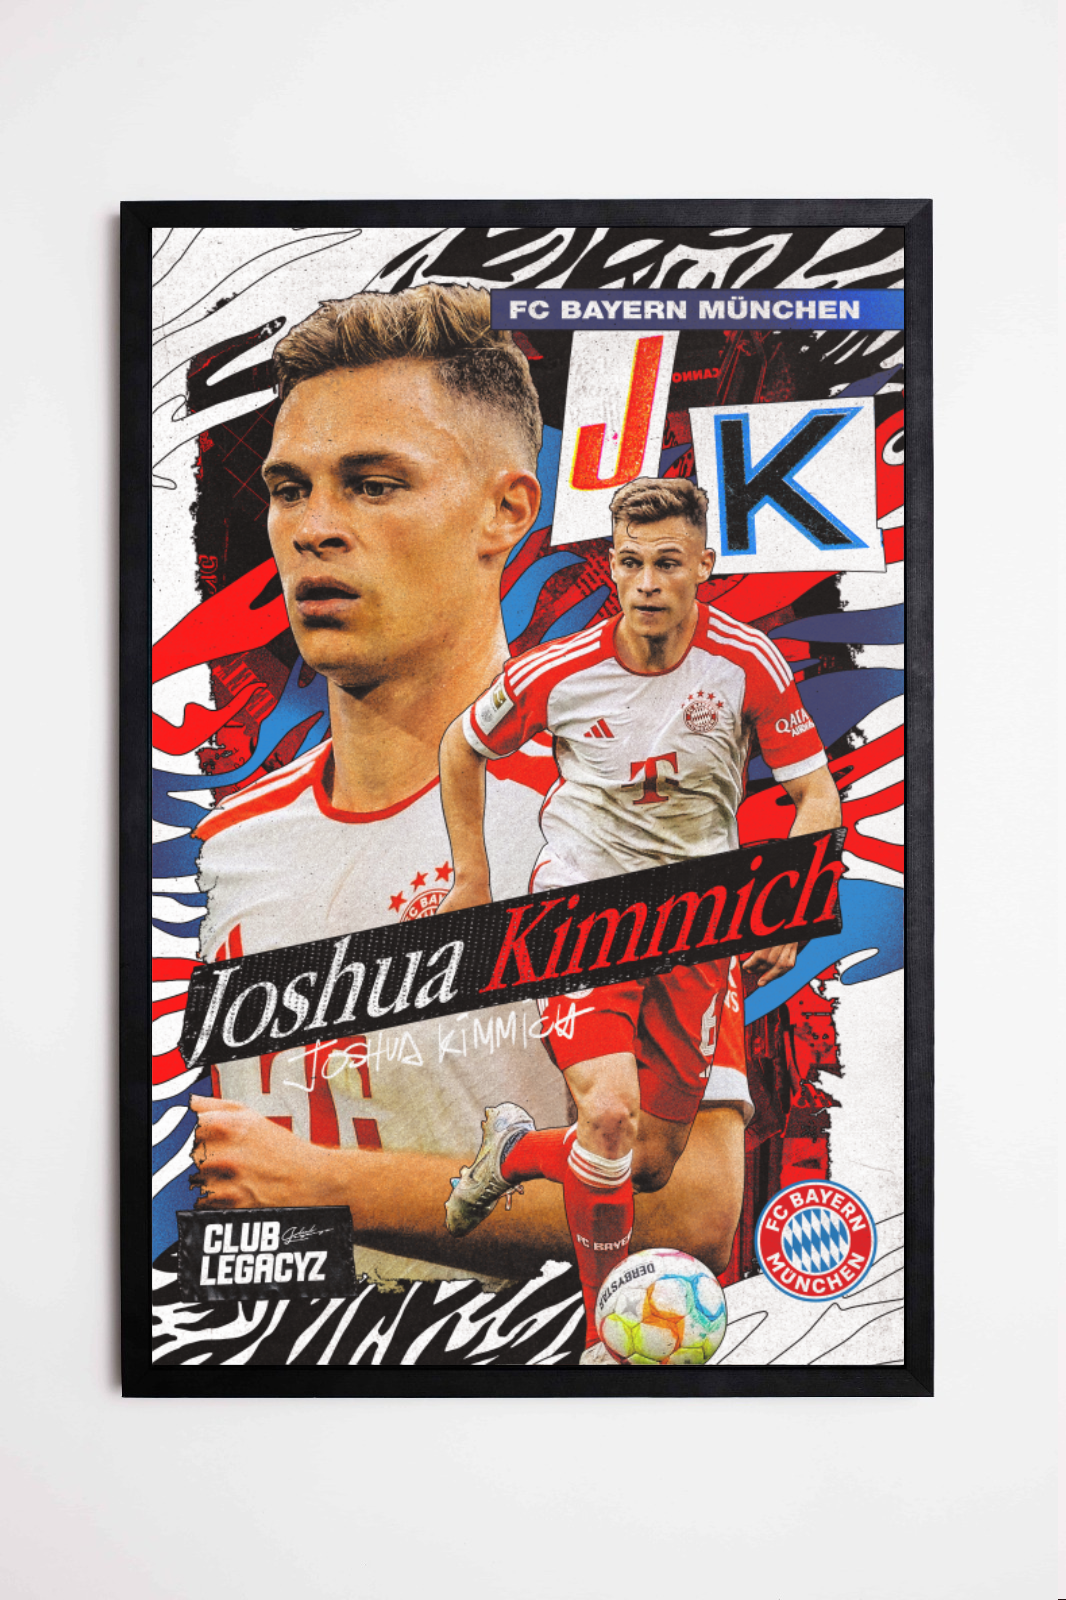 FC Bayern München - Joshua Kimmich Poster limited to 100